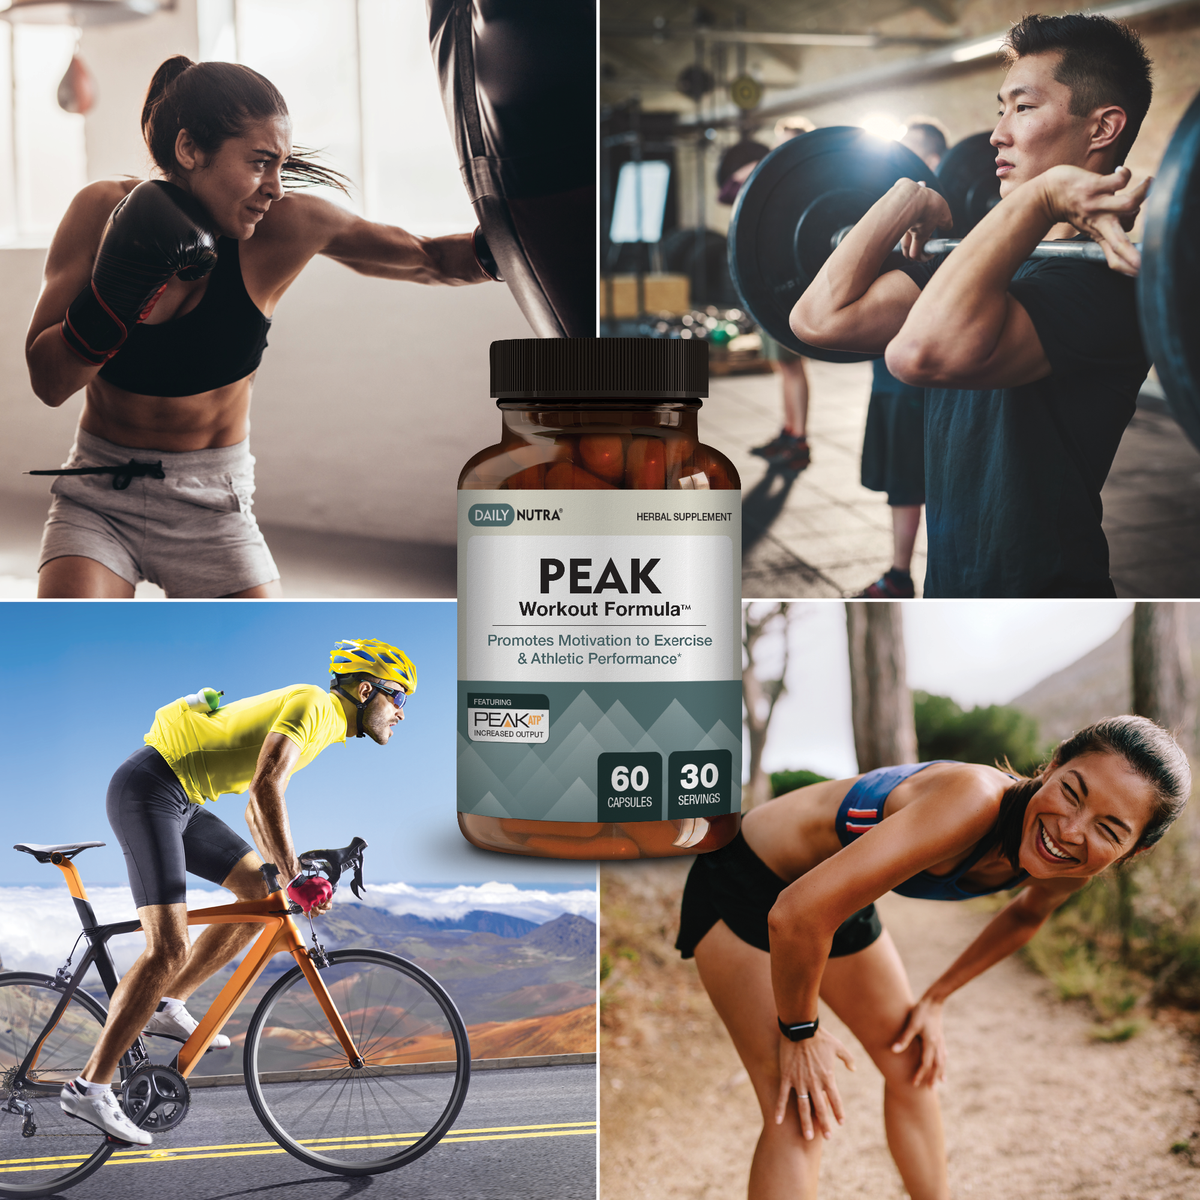 Peak Workout Formula by DailyNutra - Improved Motivation and Exercise Output | Pre-Workout and Recovery Supplement Featuring ActiGin, elevATP, Yerba